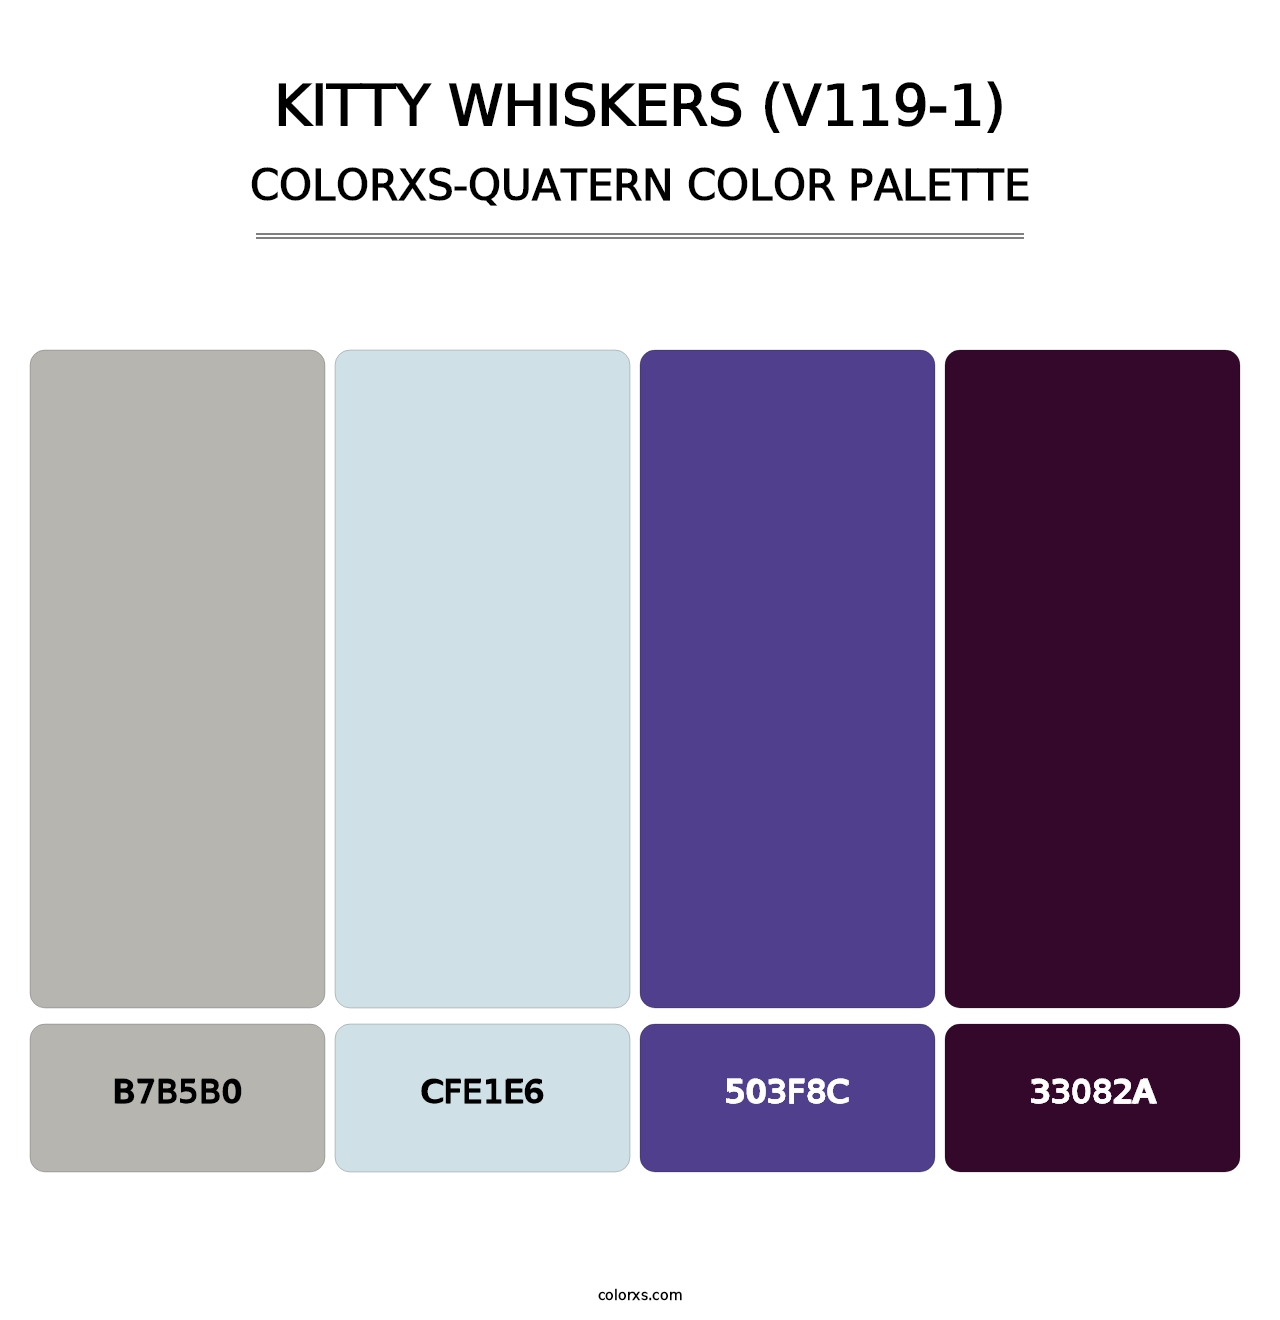 Kitty Whiskers (V119-1) - Colorxs Quatern Palette